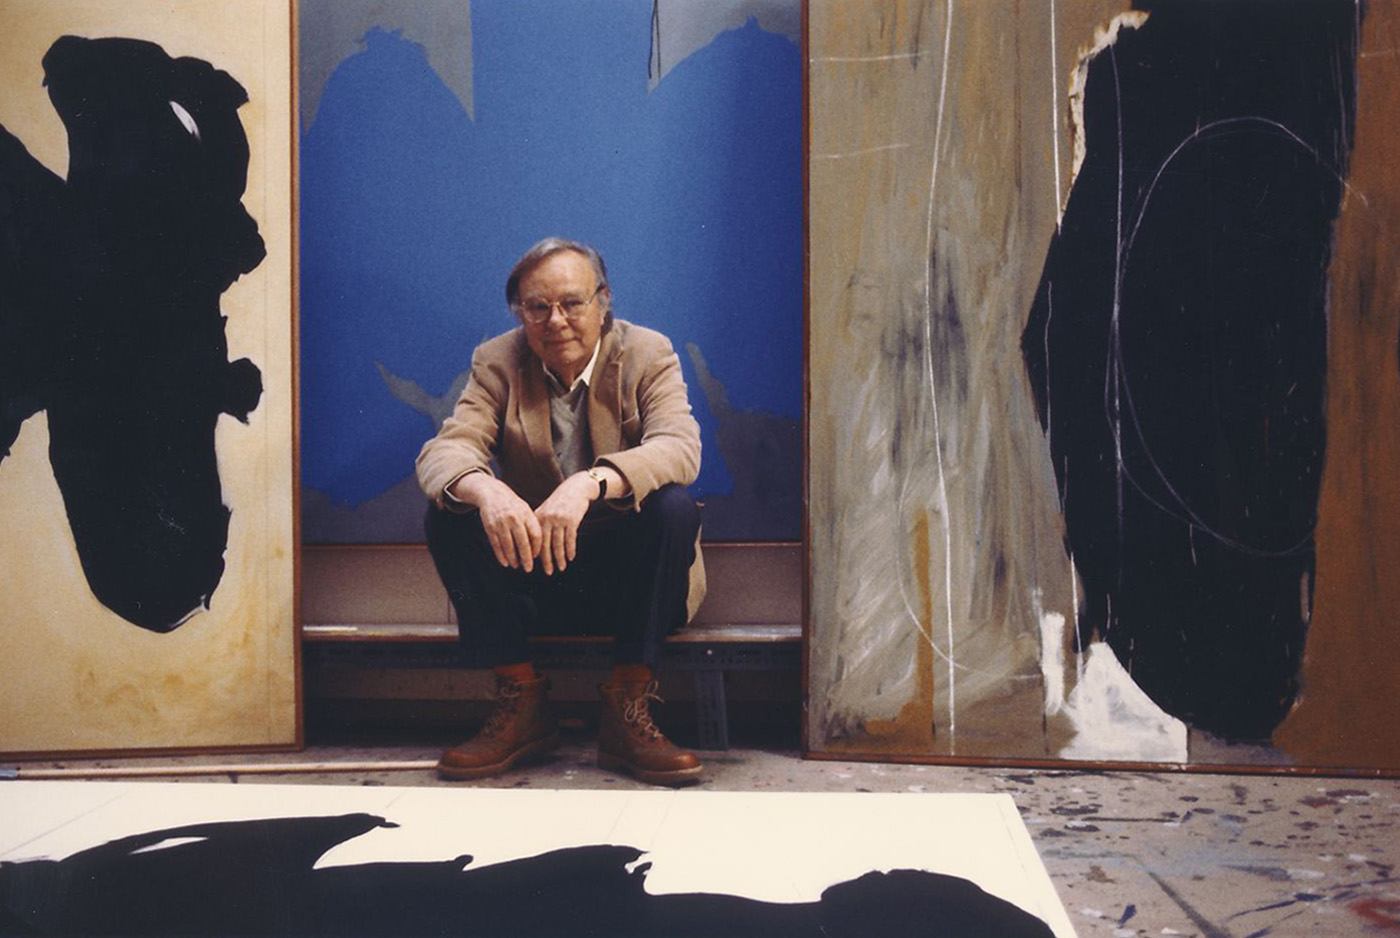 A portrait of Robert Motherwell sitting on a bench in his Greenwich studio, 1986